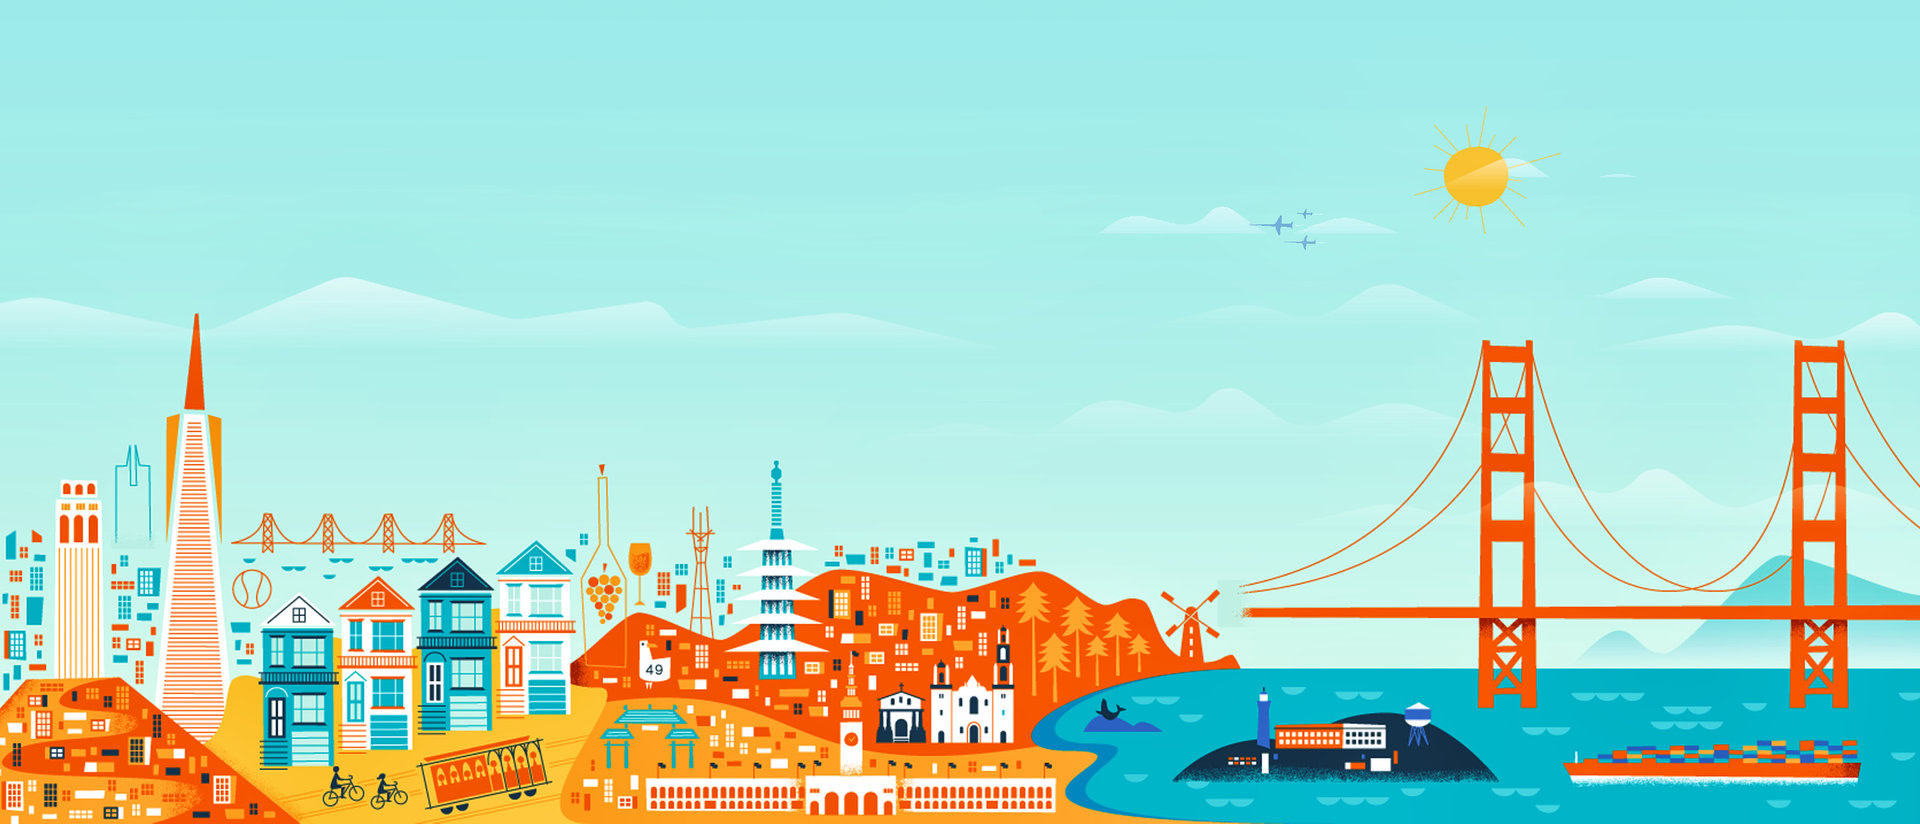 Google Now Backgrounds San Francisco (Day)